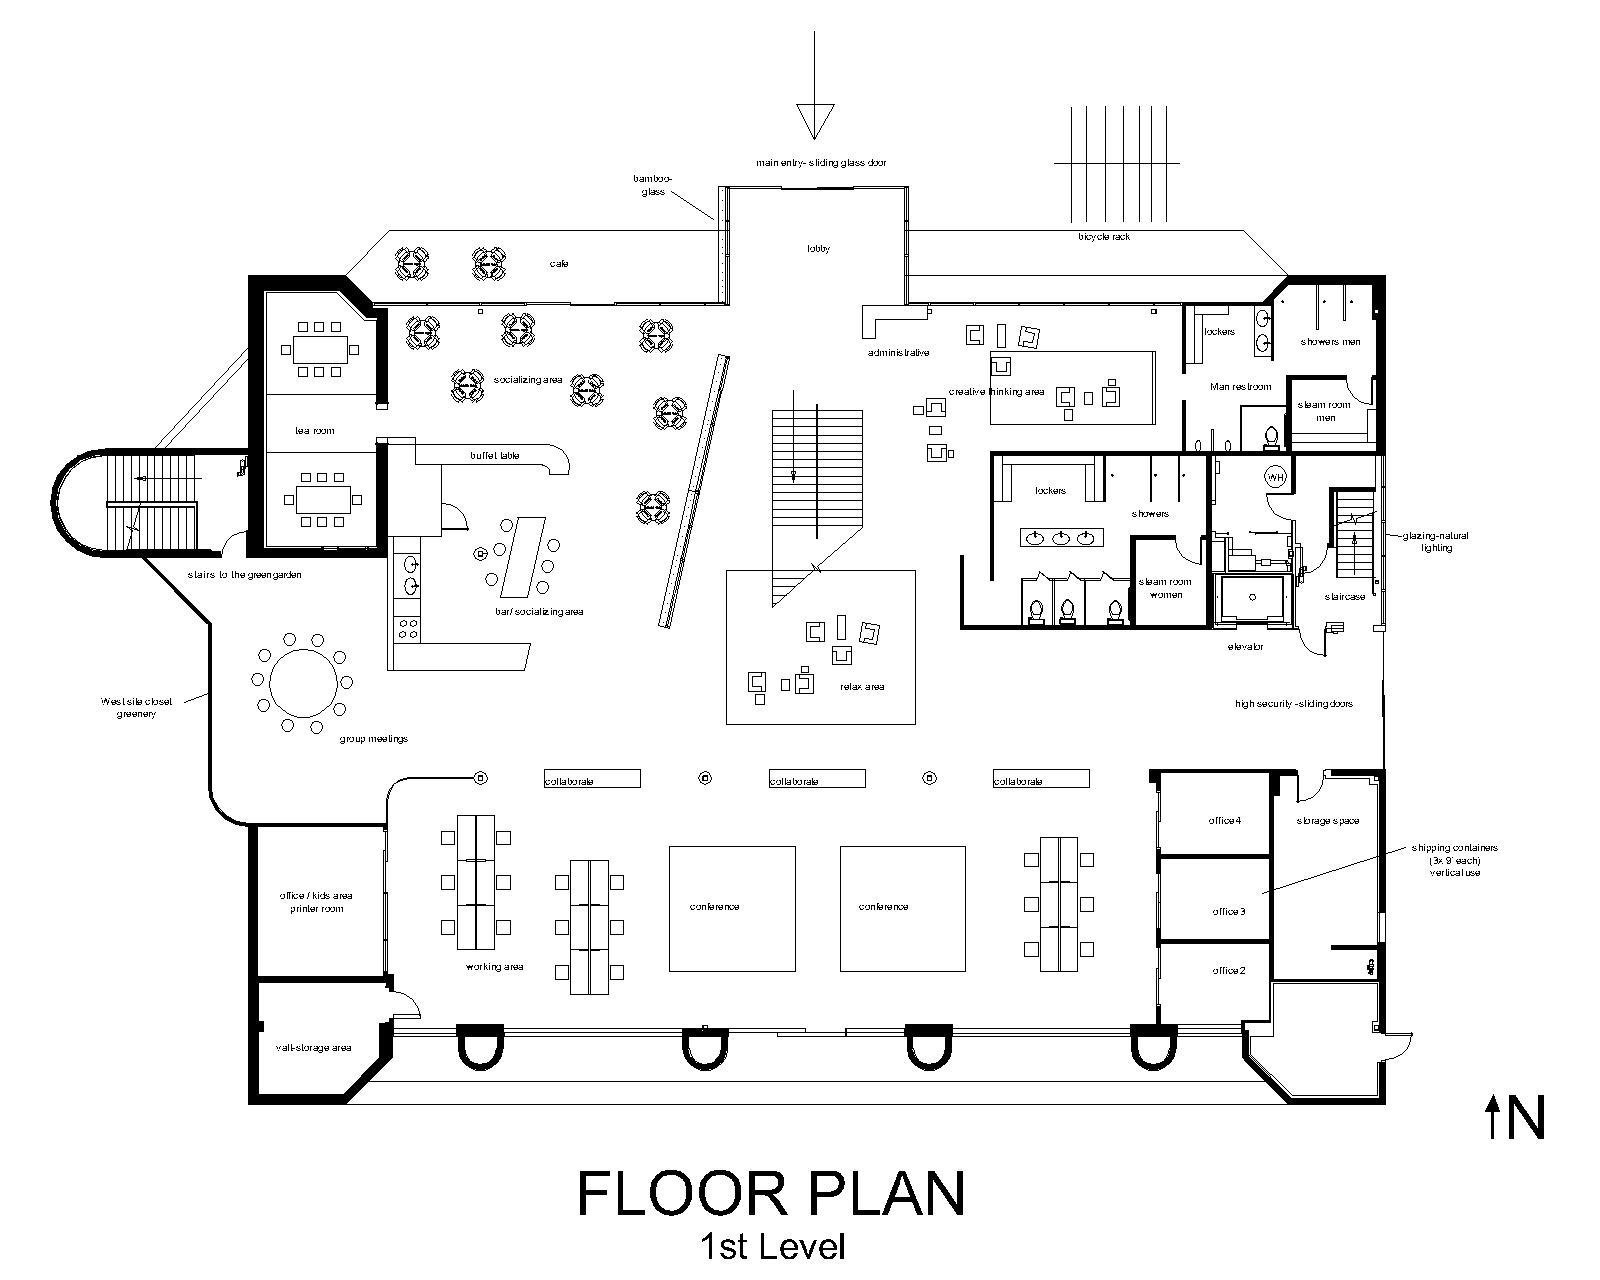 Triangle-Mania: Floor plan - midreview